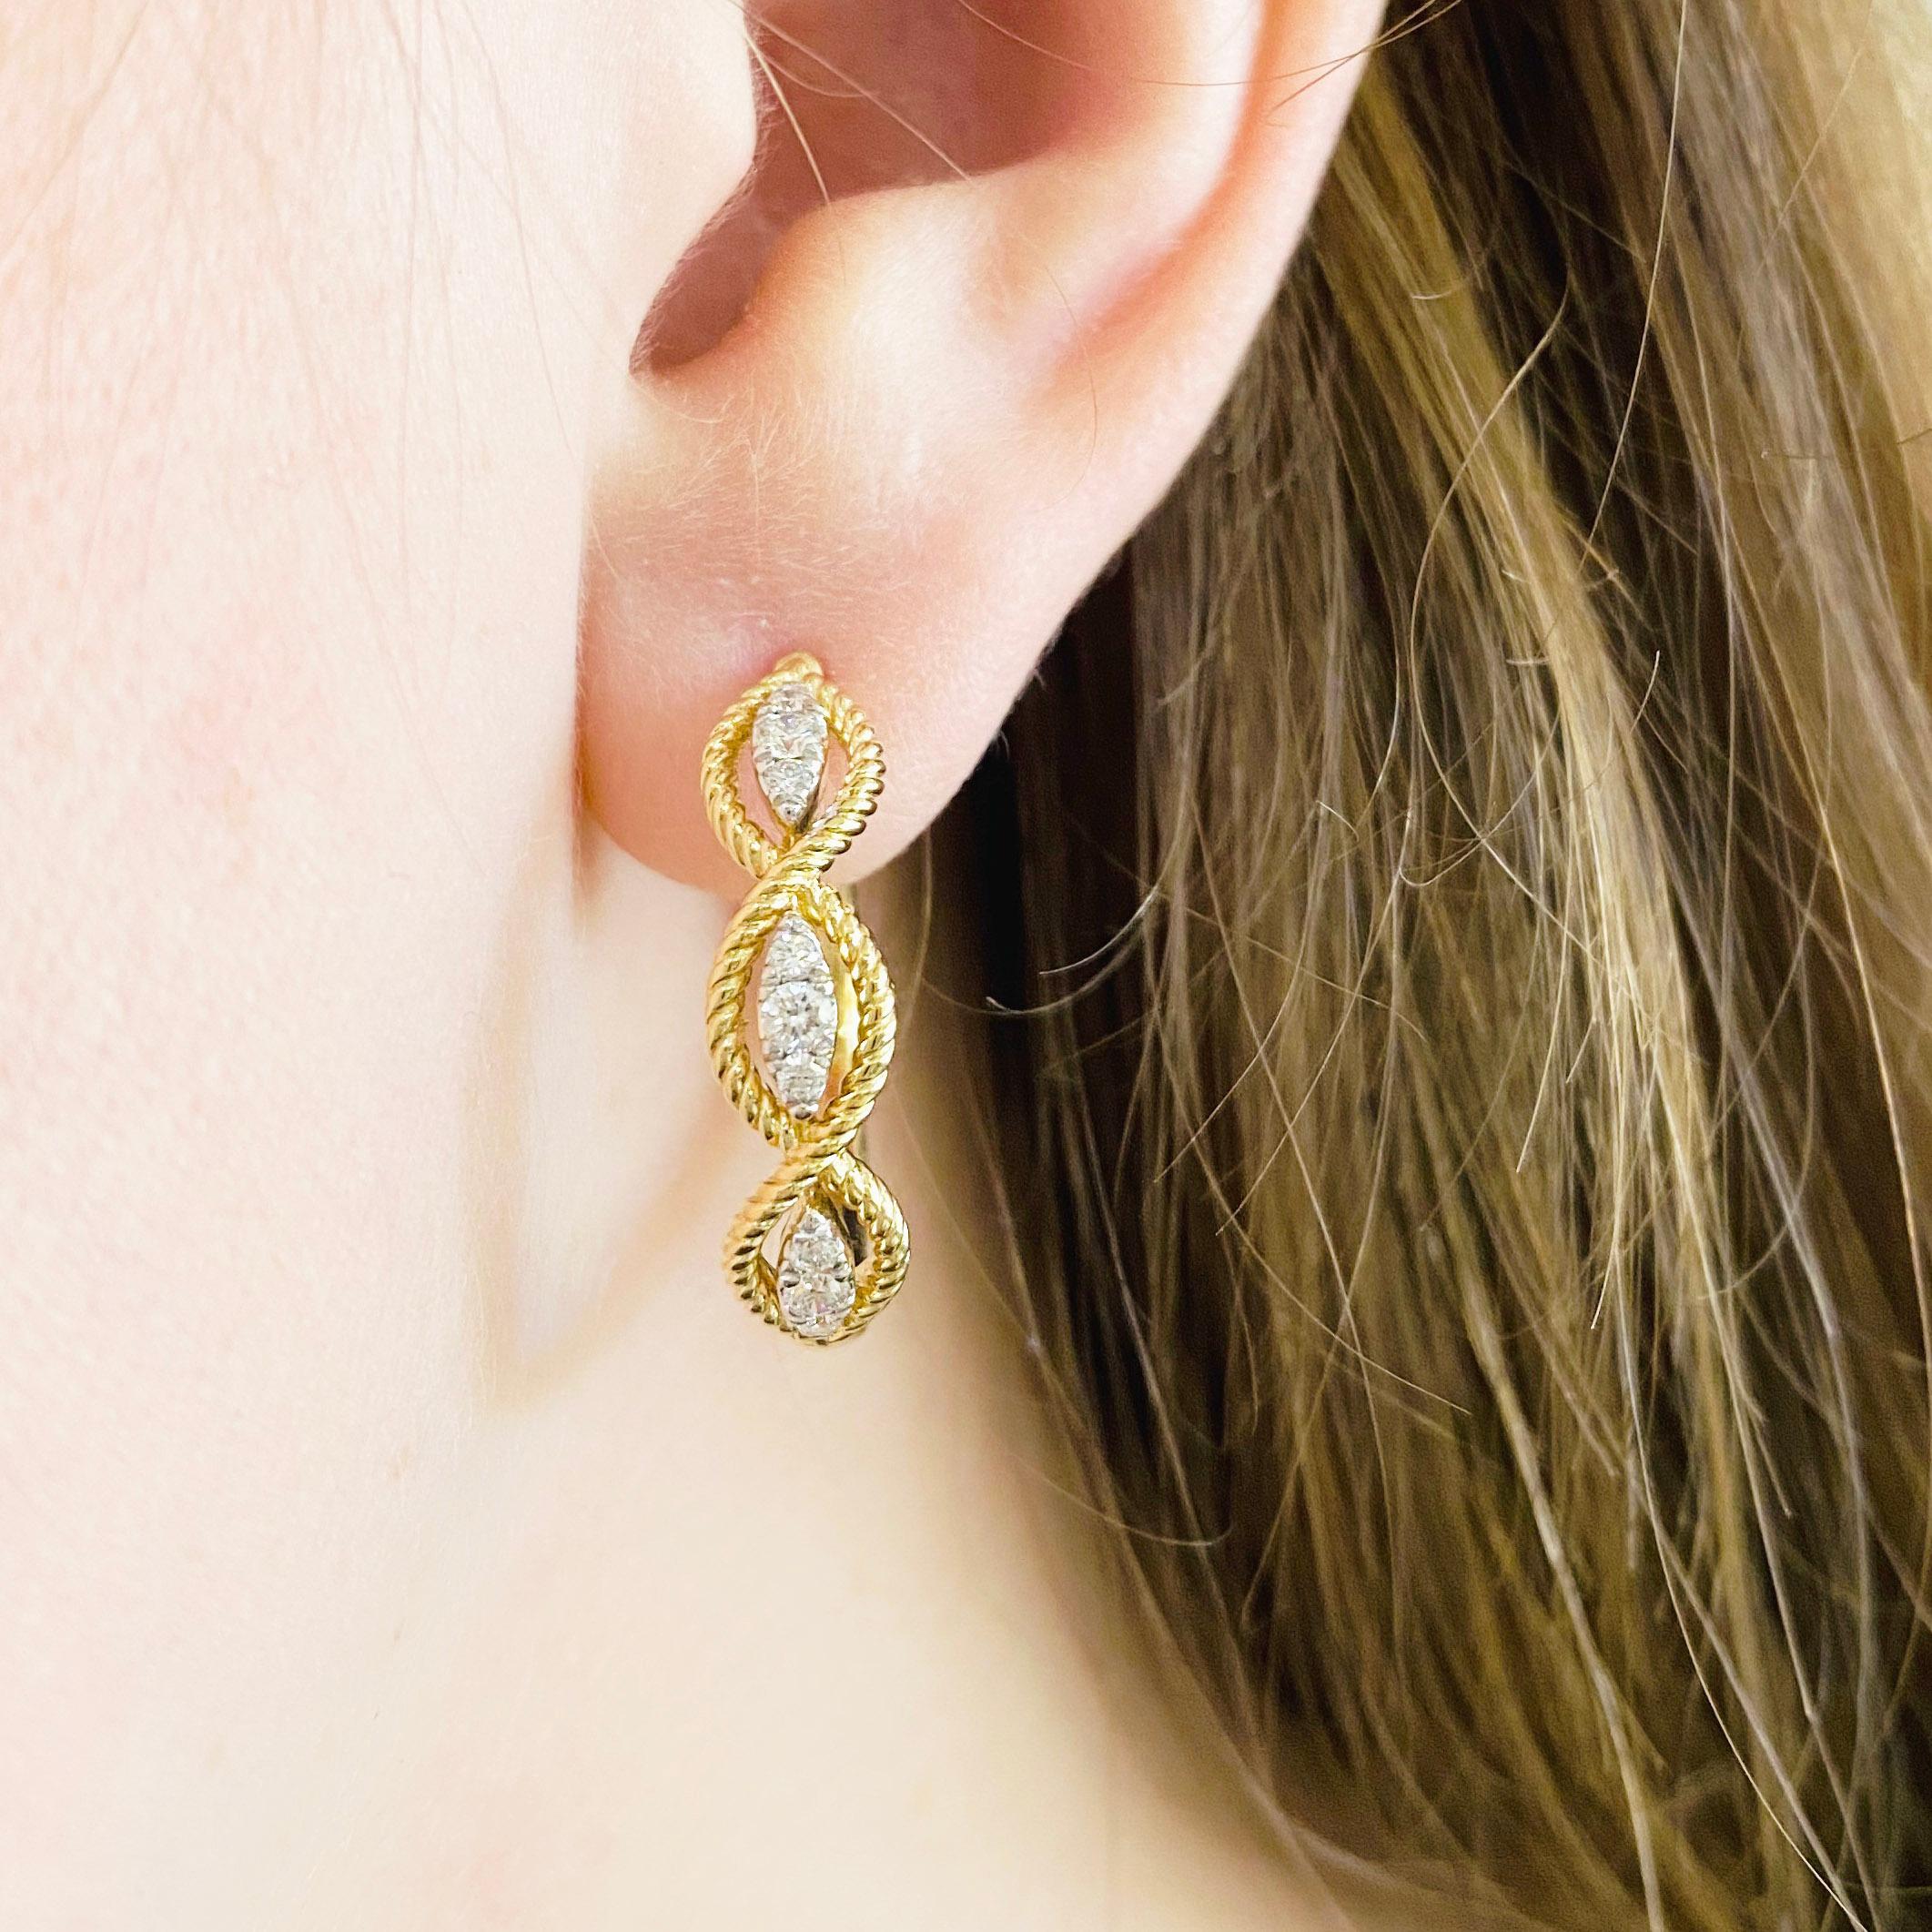 These stunning 14k yellow gold twisted layered 20mm hoops dripping with diamonds provide a look that is both trendy and classic. These diamond earrings are a great staple to add to your collection, and can be worn with both casual and formal wear. 